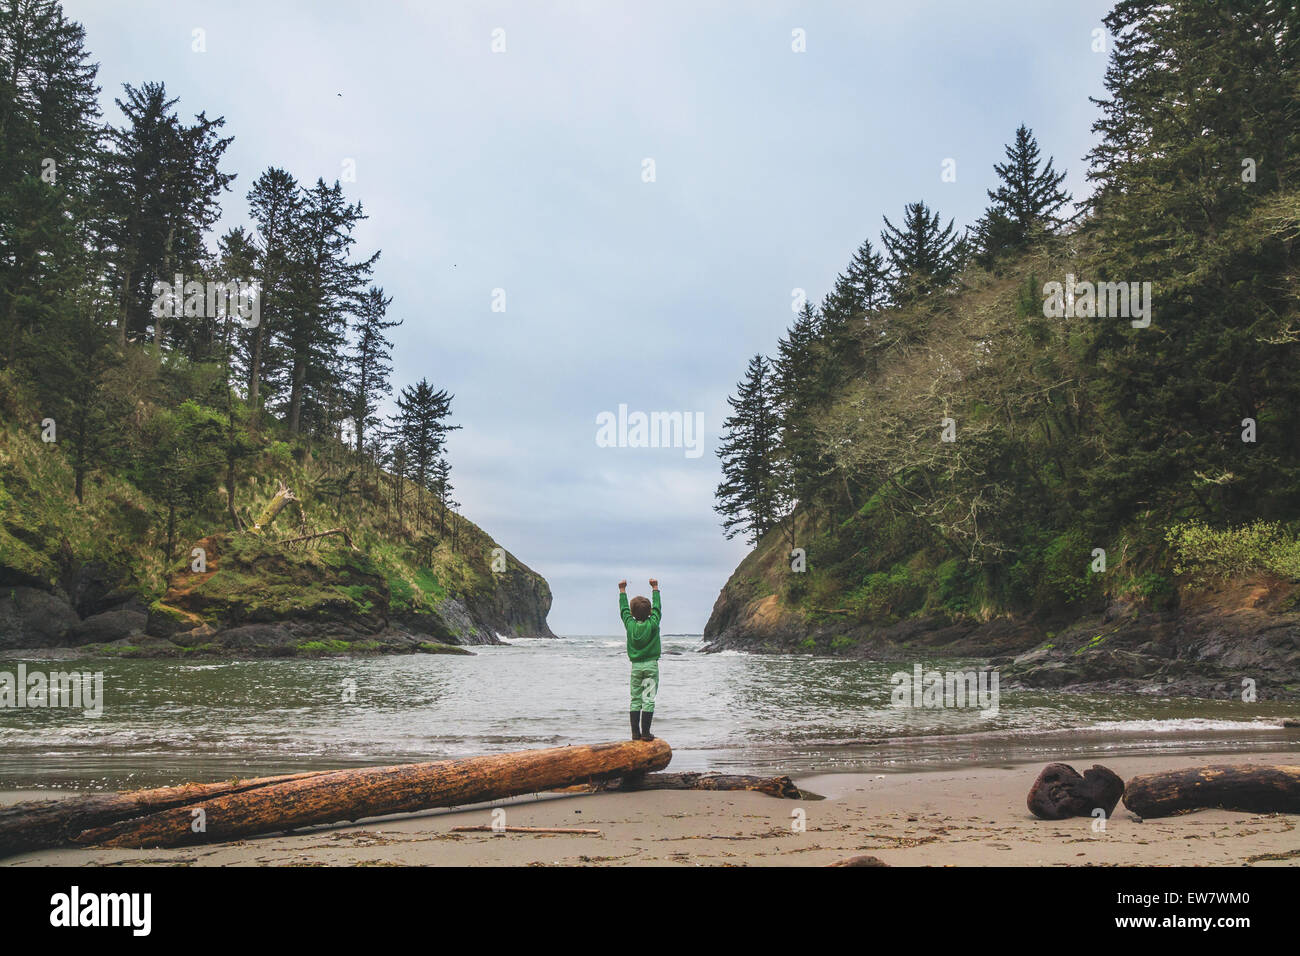 Boy standing on driftwood on the beach with arms raised Stock Photo